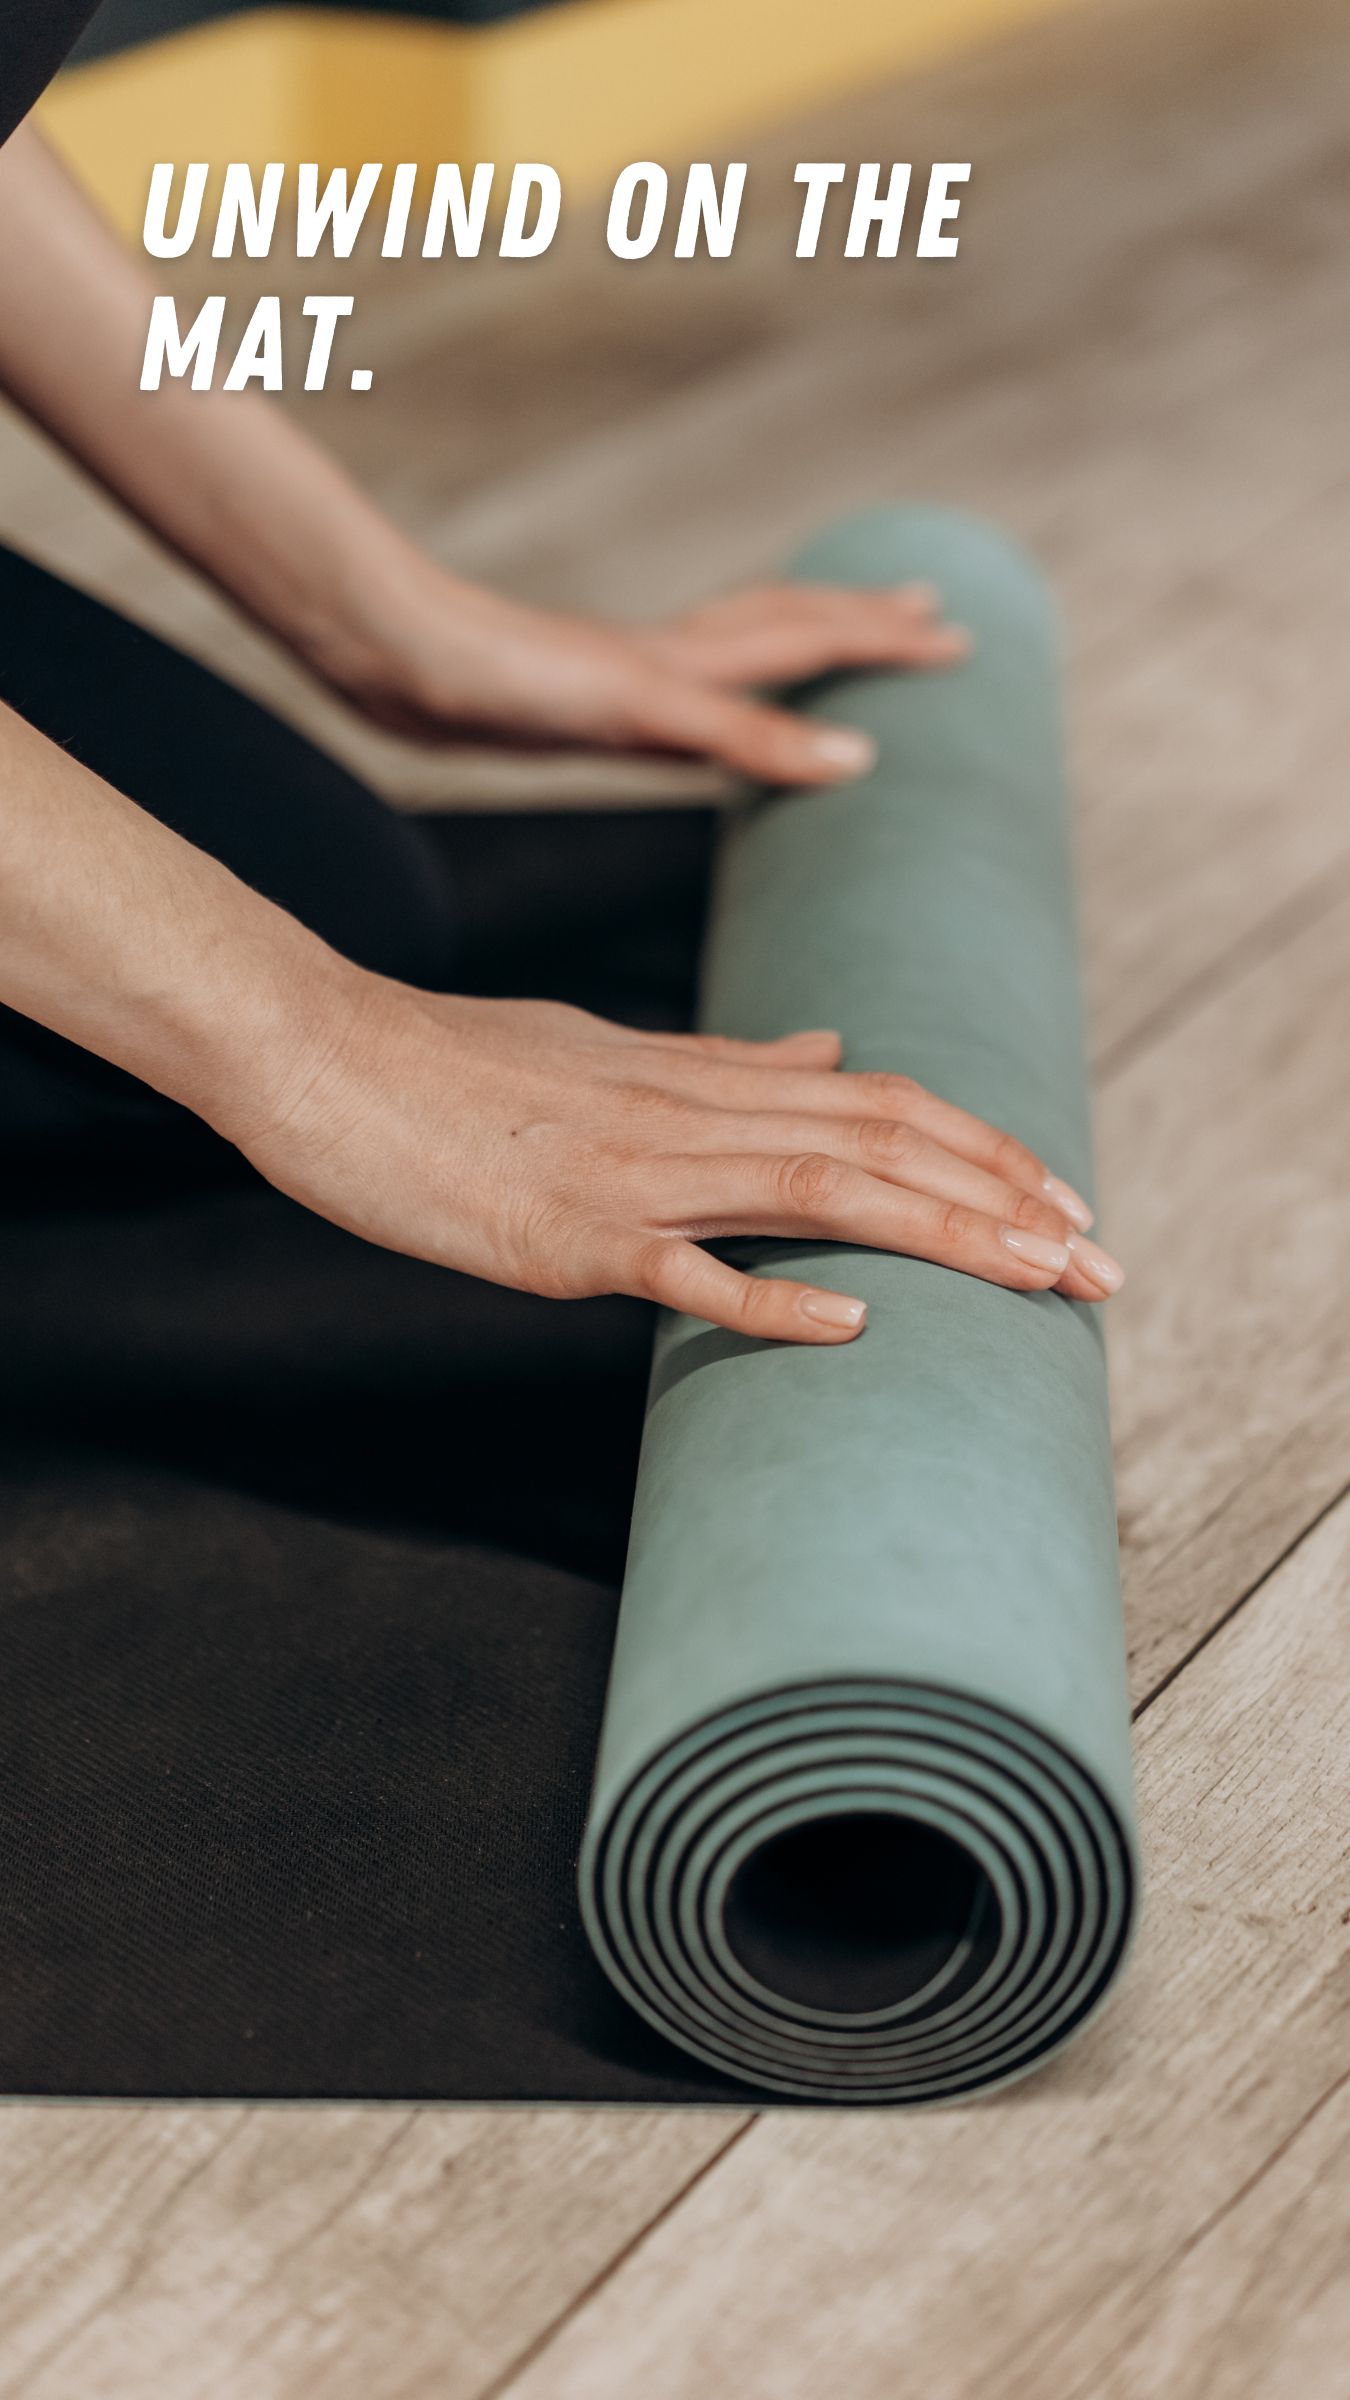 Whether you’re a long-time yogi or someone just looking to destress, Juice House’s Yoga “blend” is for all. We aim to provide a relaxing and interactive environment for everyone to wind down and meet new friends on campus through yoga.